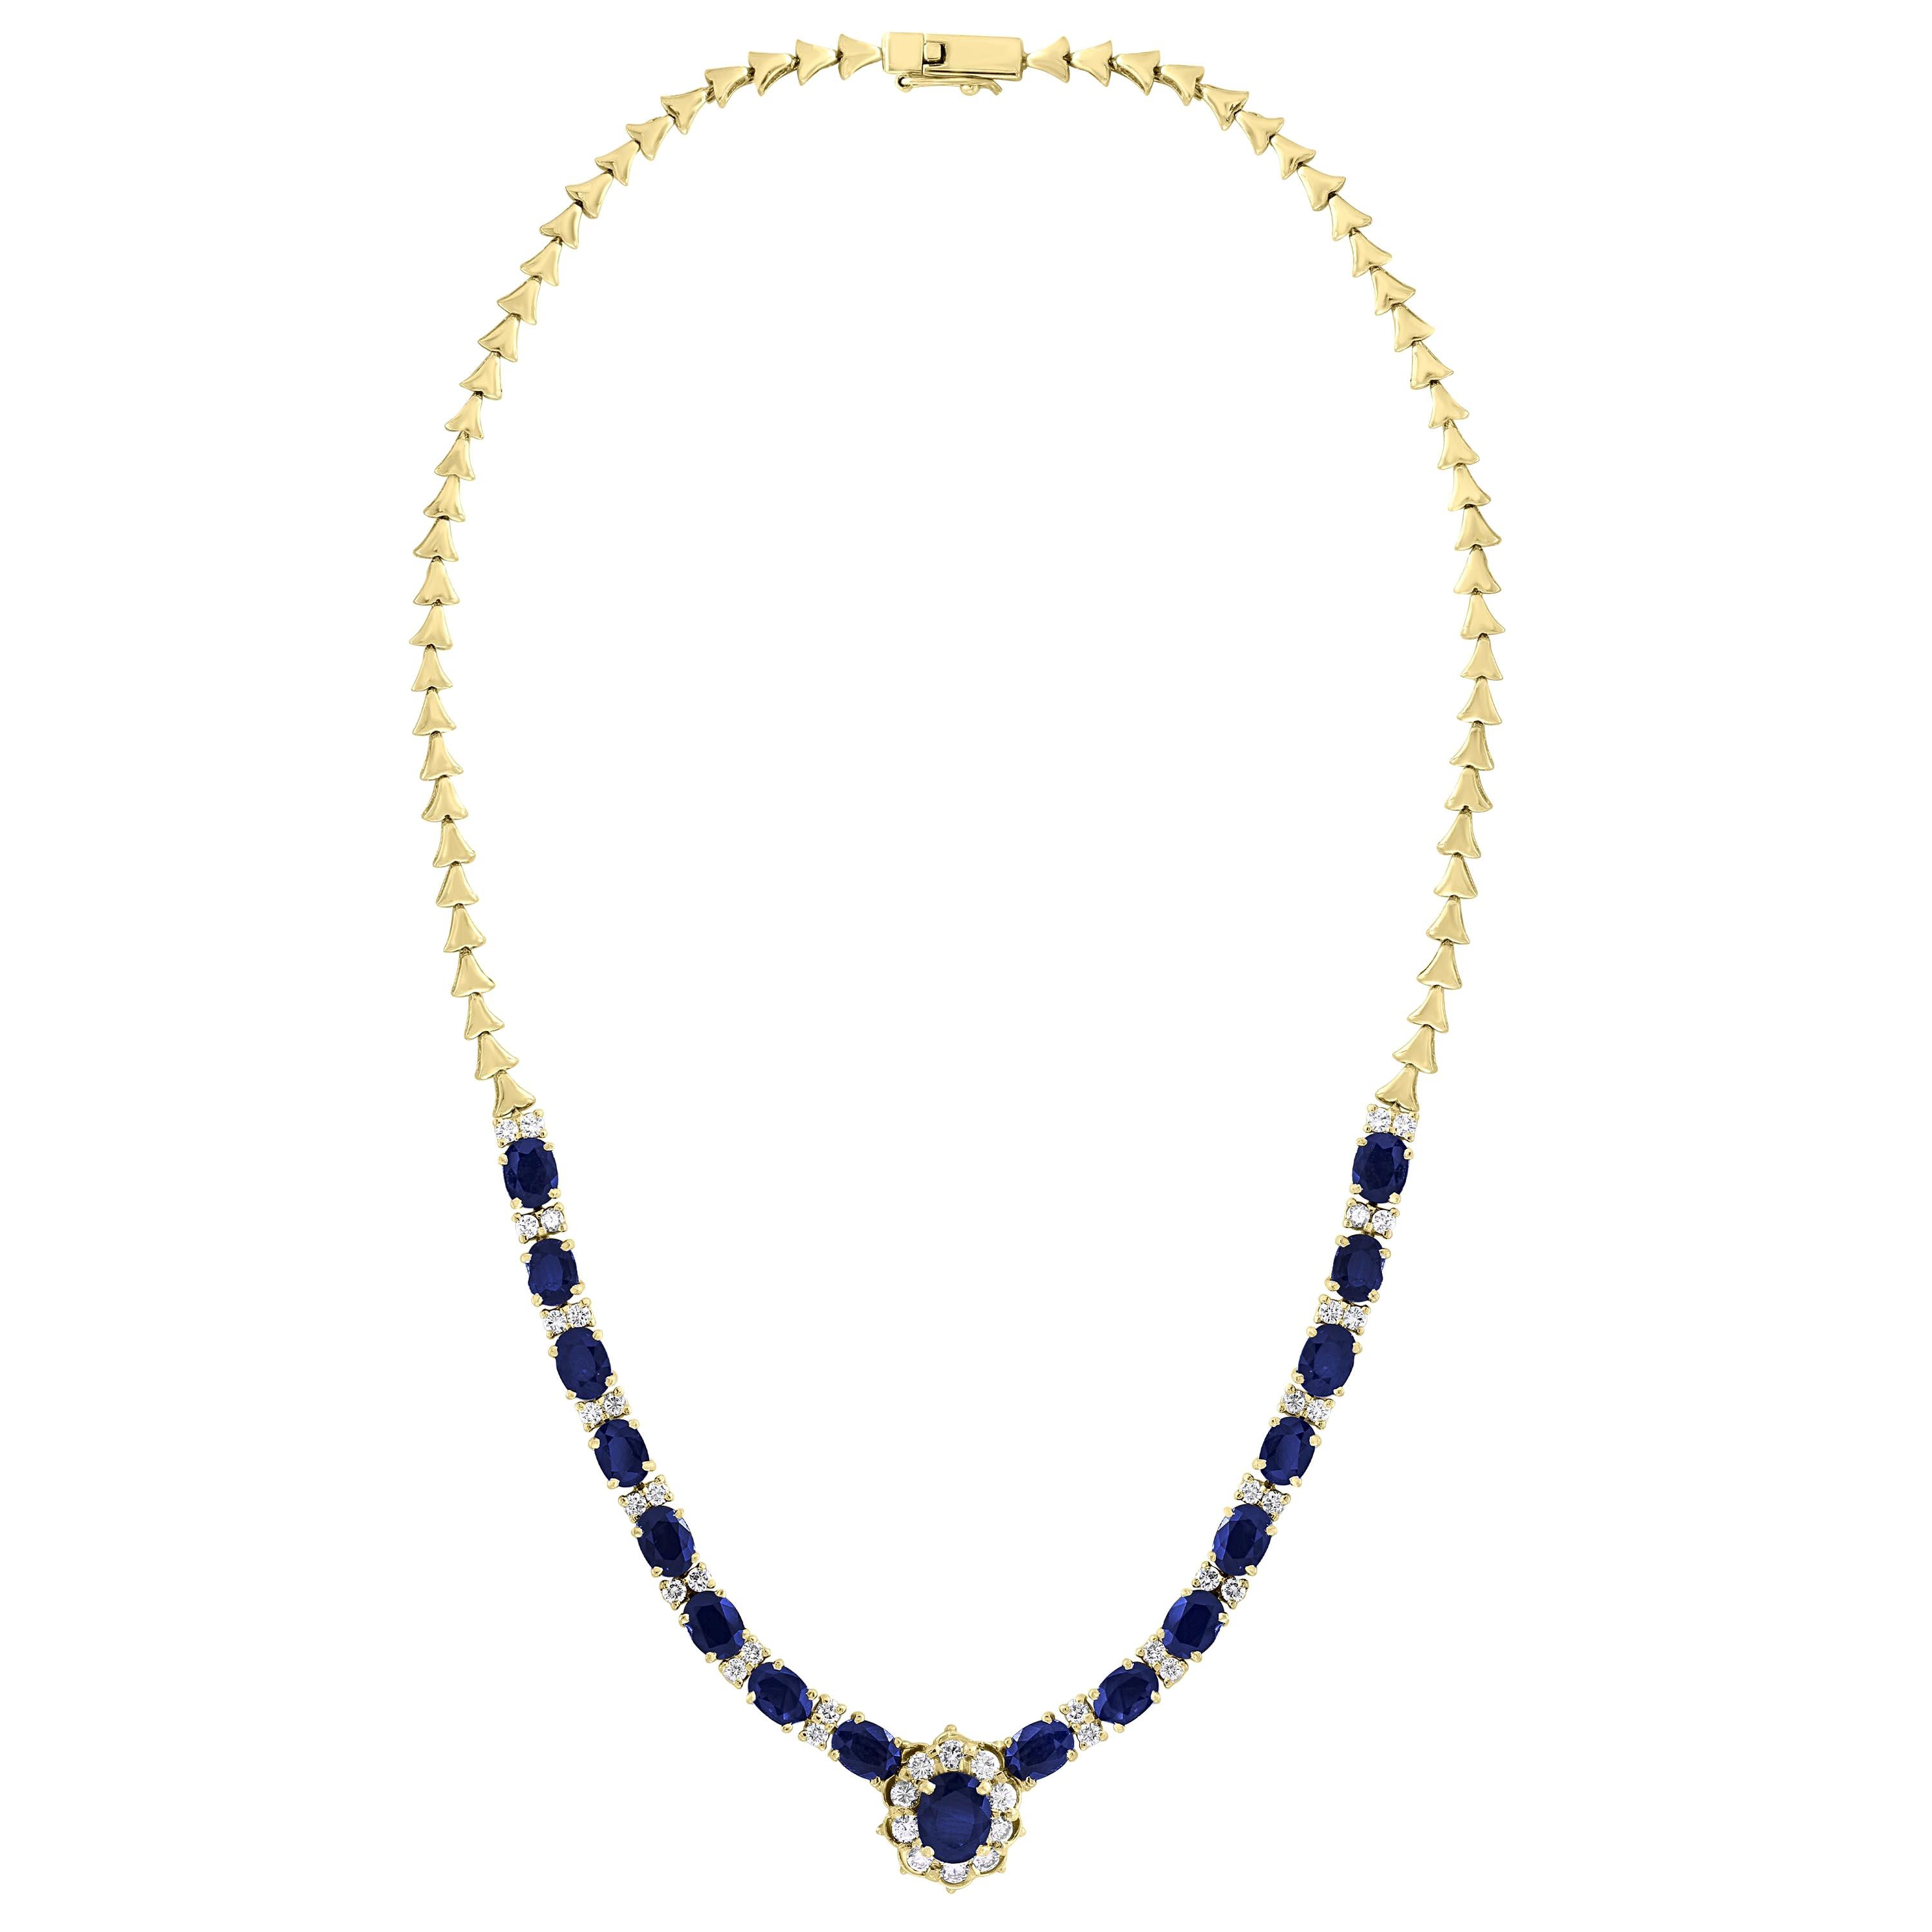 17 Carat Oval Sapphire and 3.5 Carat Diamonds Necklace 18 Karat Yellow Gold For Sale